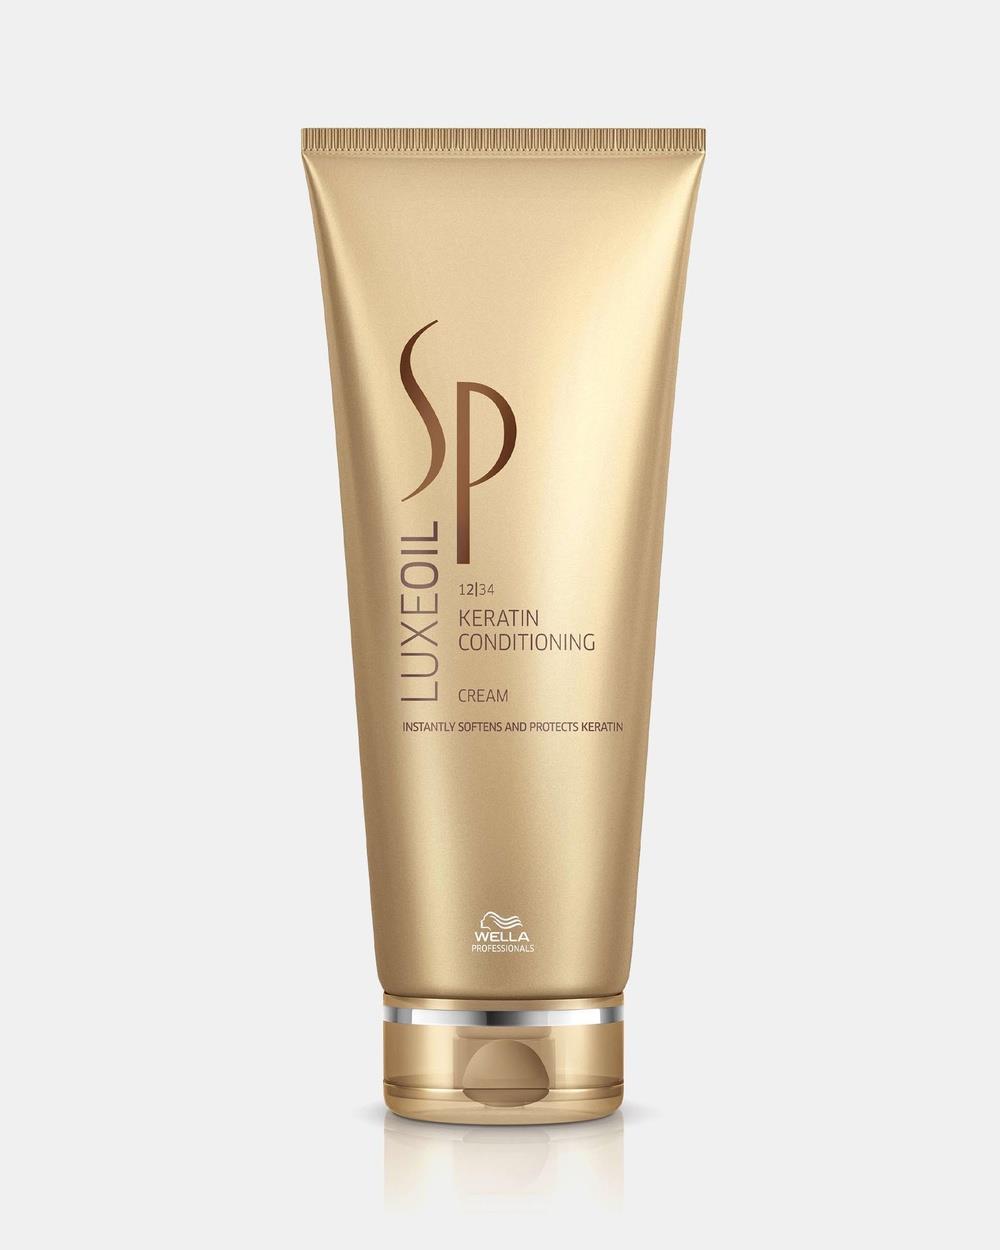 Wella - SP Classic LuxeOil Keratin Conditioning Cream - Hair (SP CLASSIC LUXEOIL KERATIN CONDITIONING CREAM) SP Classic LuxeOil Keratin Conditioning Cream